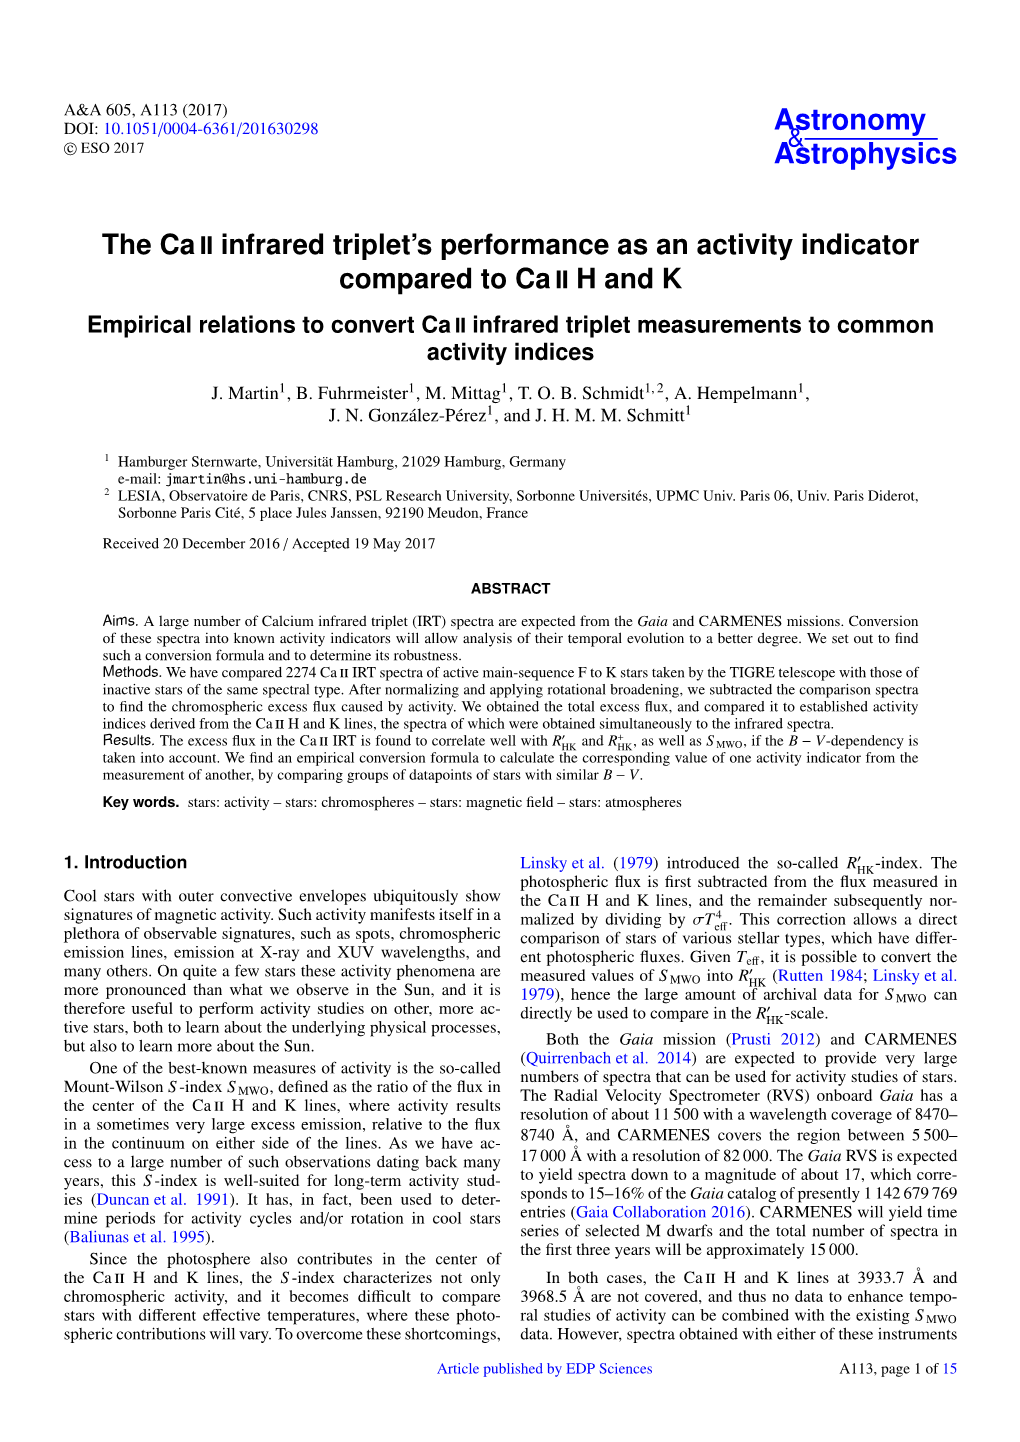 The Ca Ii Infrared Triplet's Performance As an Activity Indicator Compared To